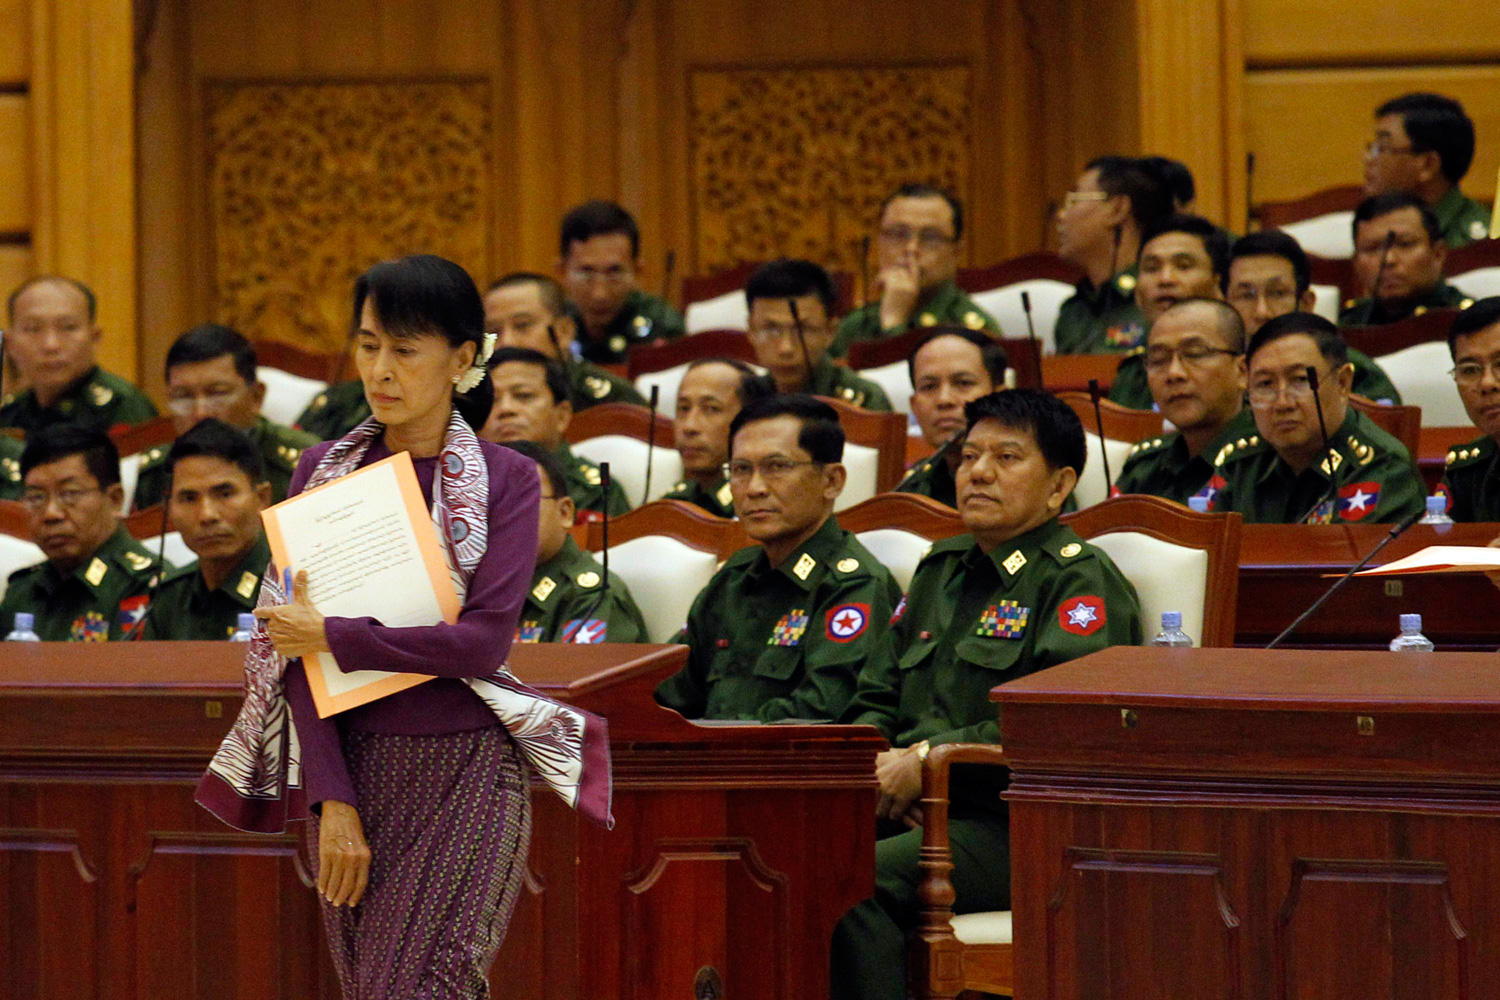 May 2, 2012. Pro-democracy leader Aung San Suu Kyi walks to take an oath at the lower house of parliament in Naypyitaw, Myanmar.